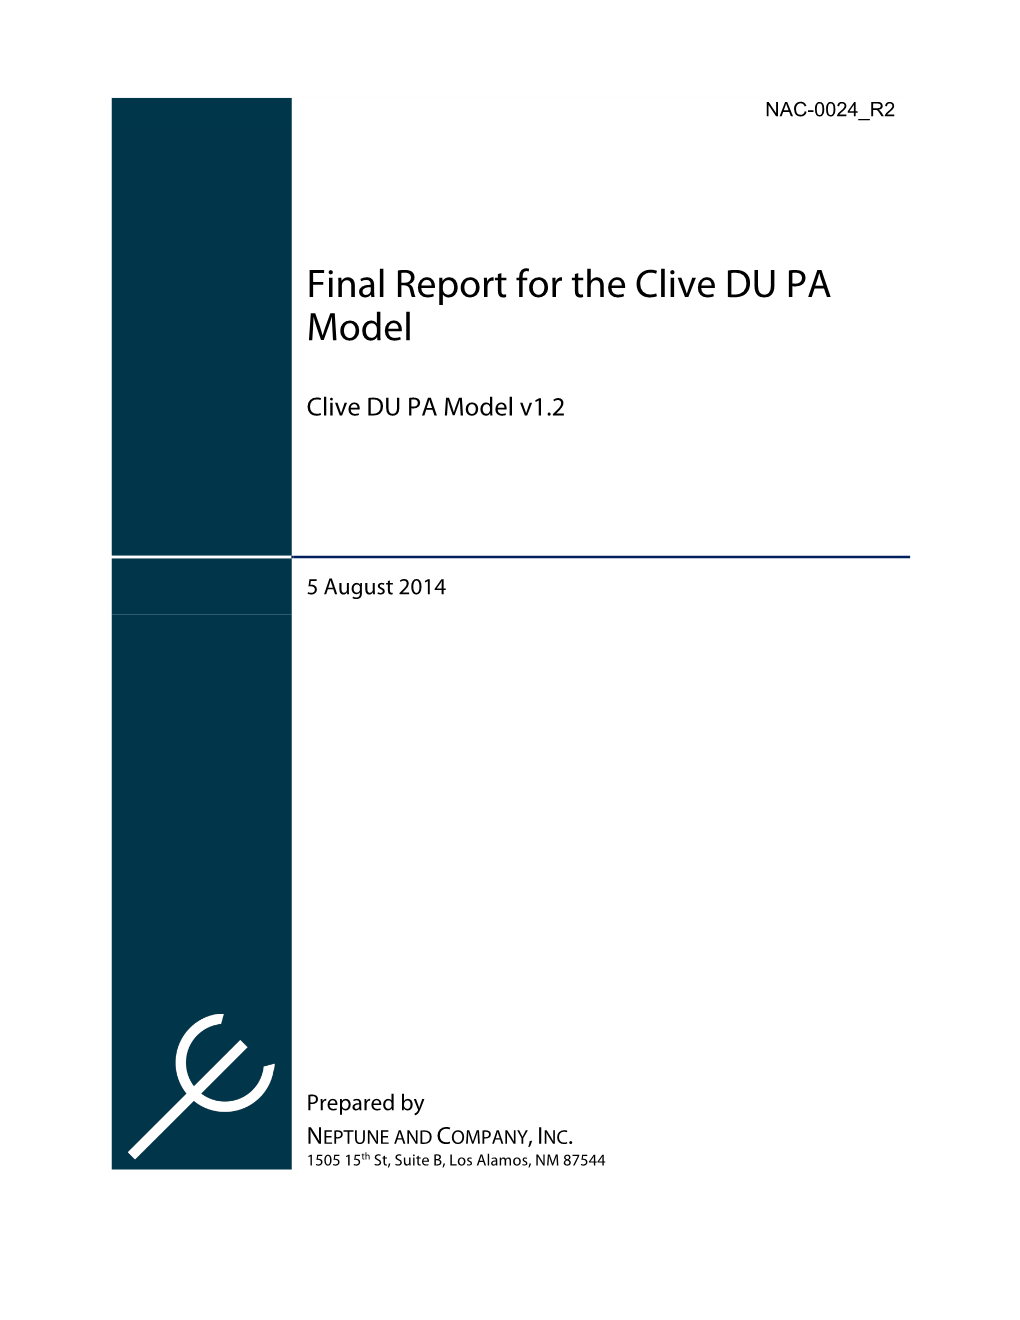 Final Report for the Clive DU PA Model